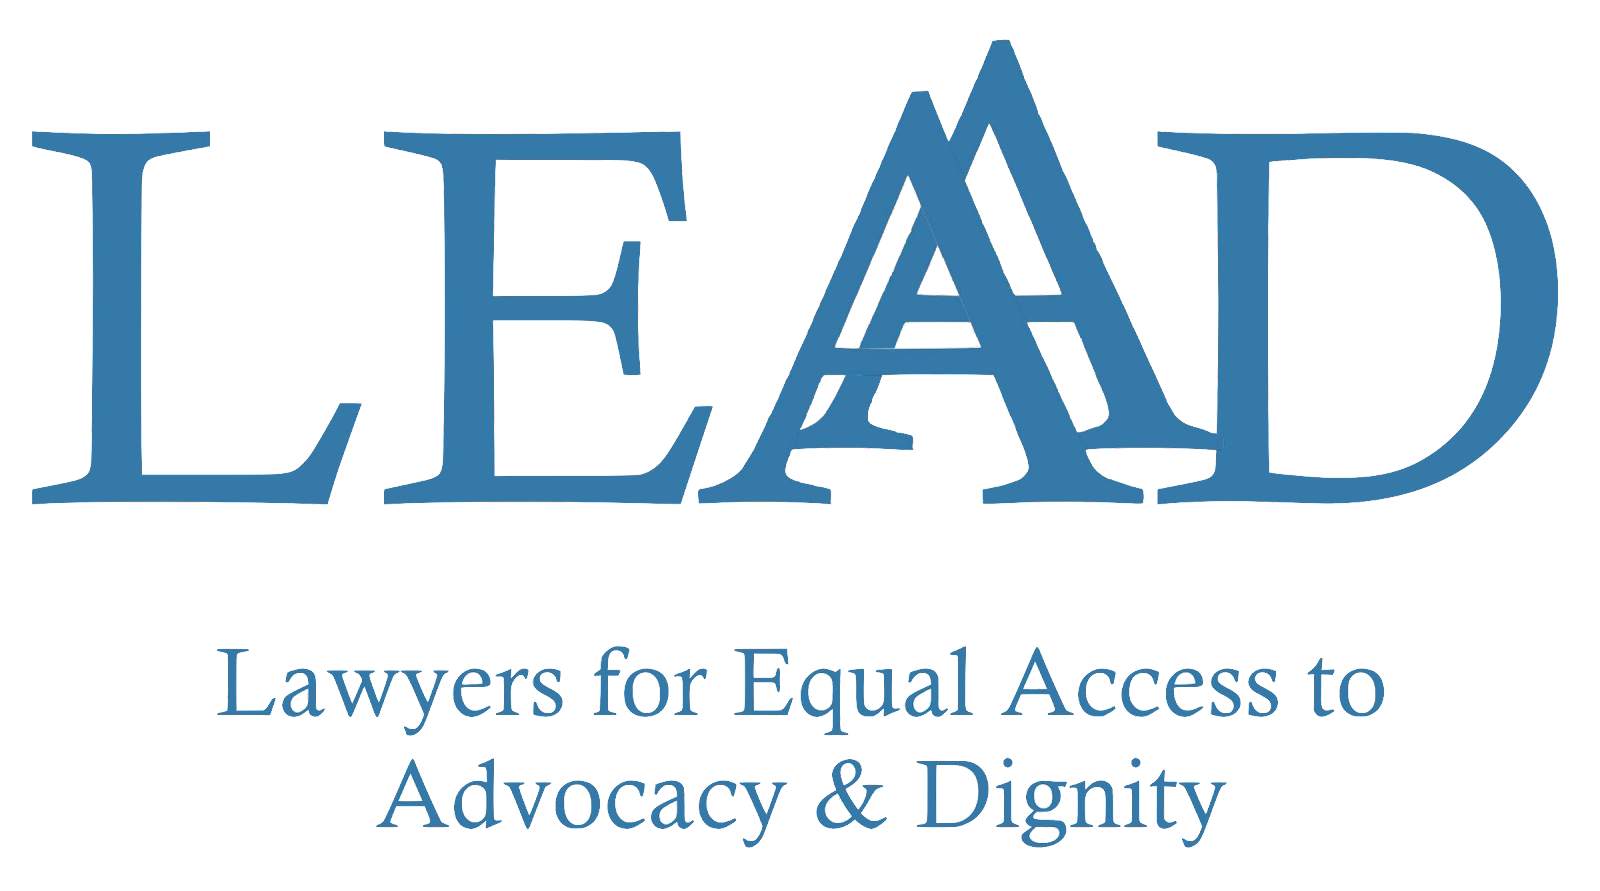 Lawyers for Equal Access to Advocacy & Dignity (LEAAD)